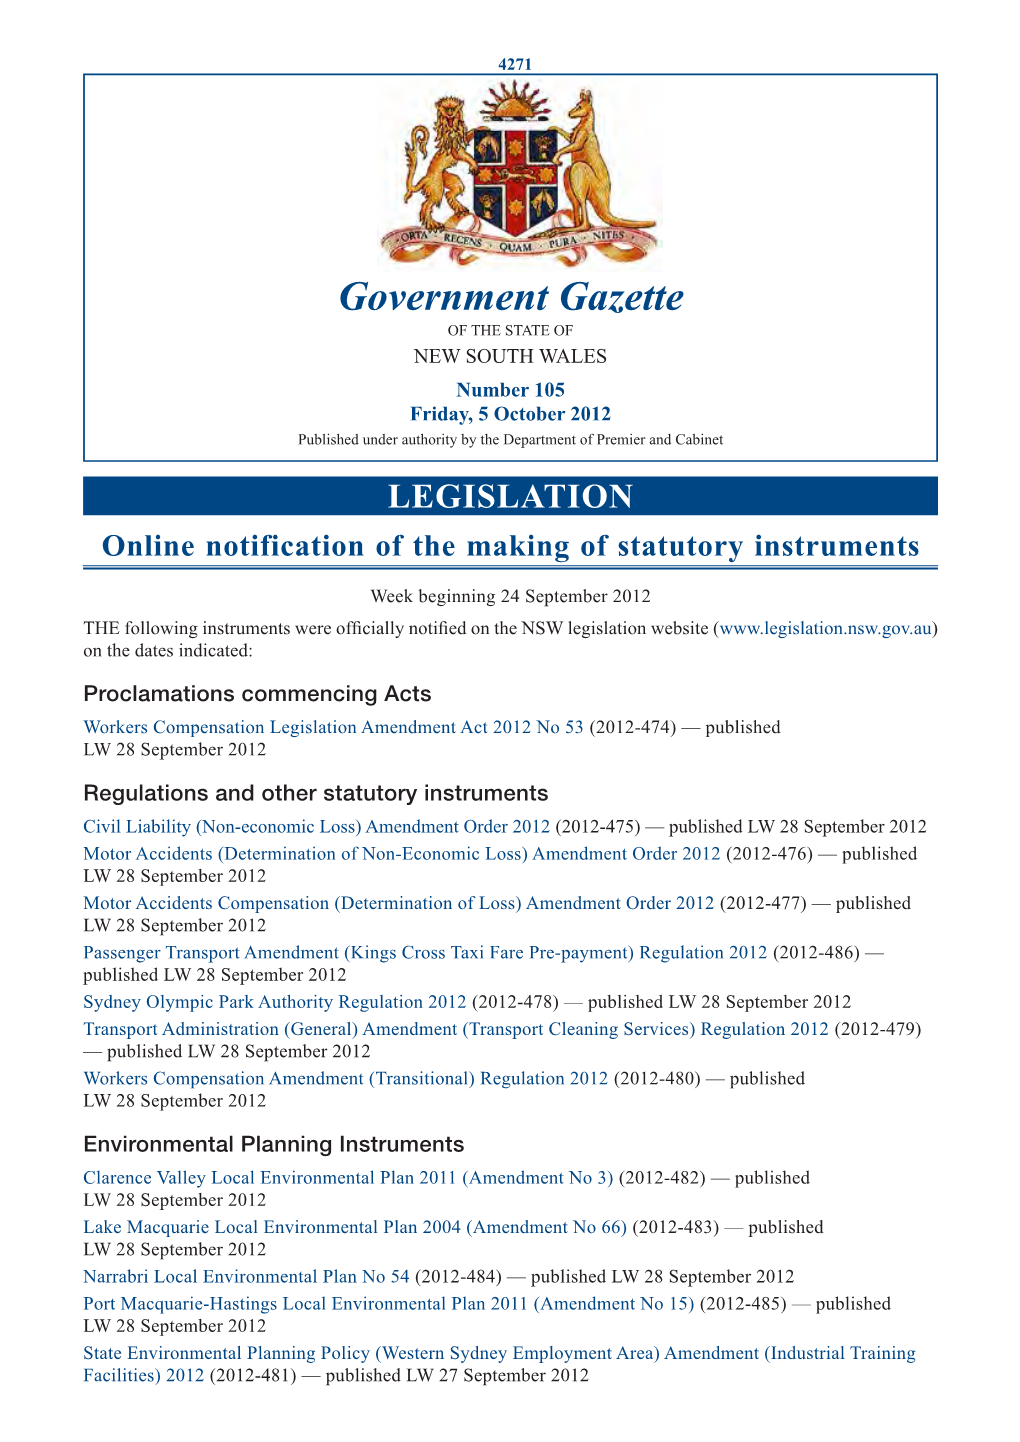 New South Wales Government Gazette No. 40 of 5 October 2012